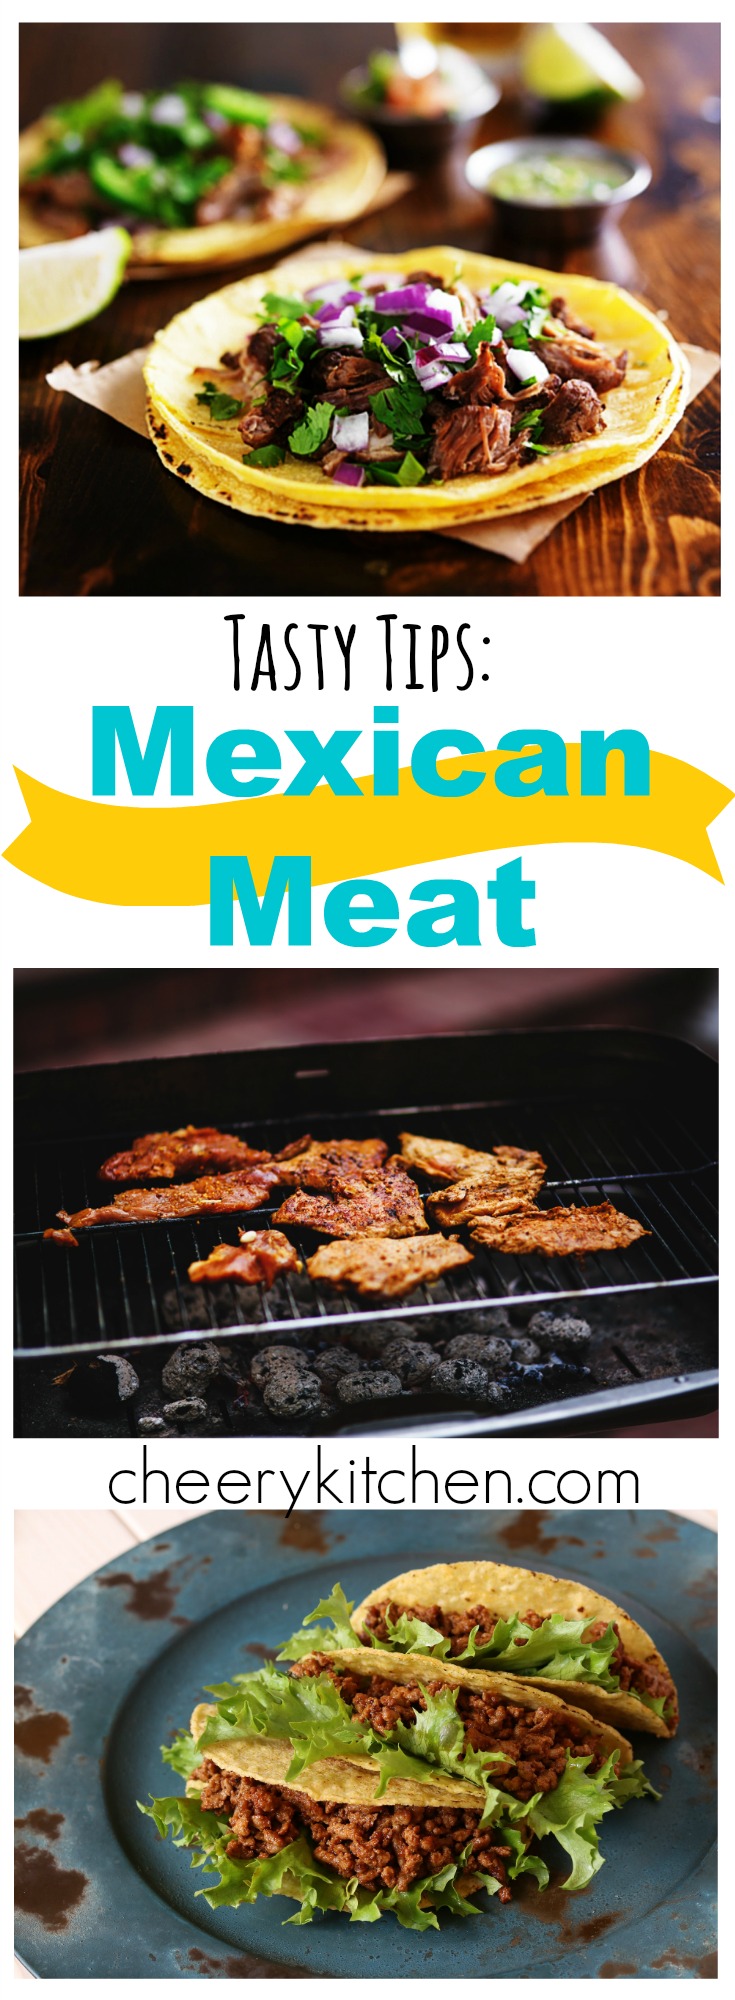 Get our Tasty Tip: Mexican Meat, no need for confusion. Here's all the info you need to stuff your tortillas with the most delicious Mexican Meat! 